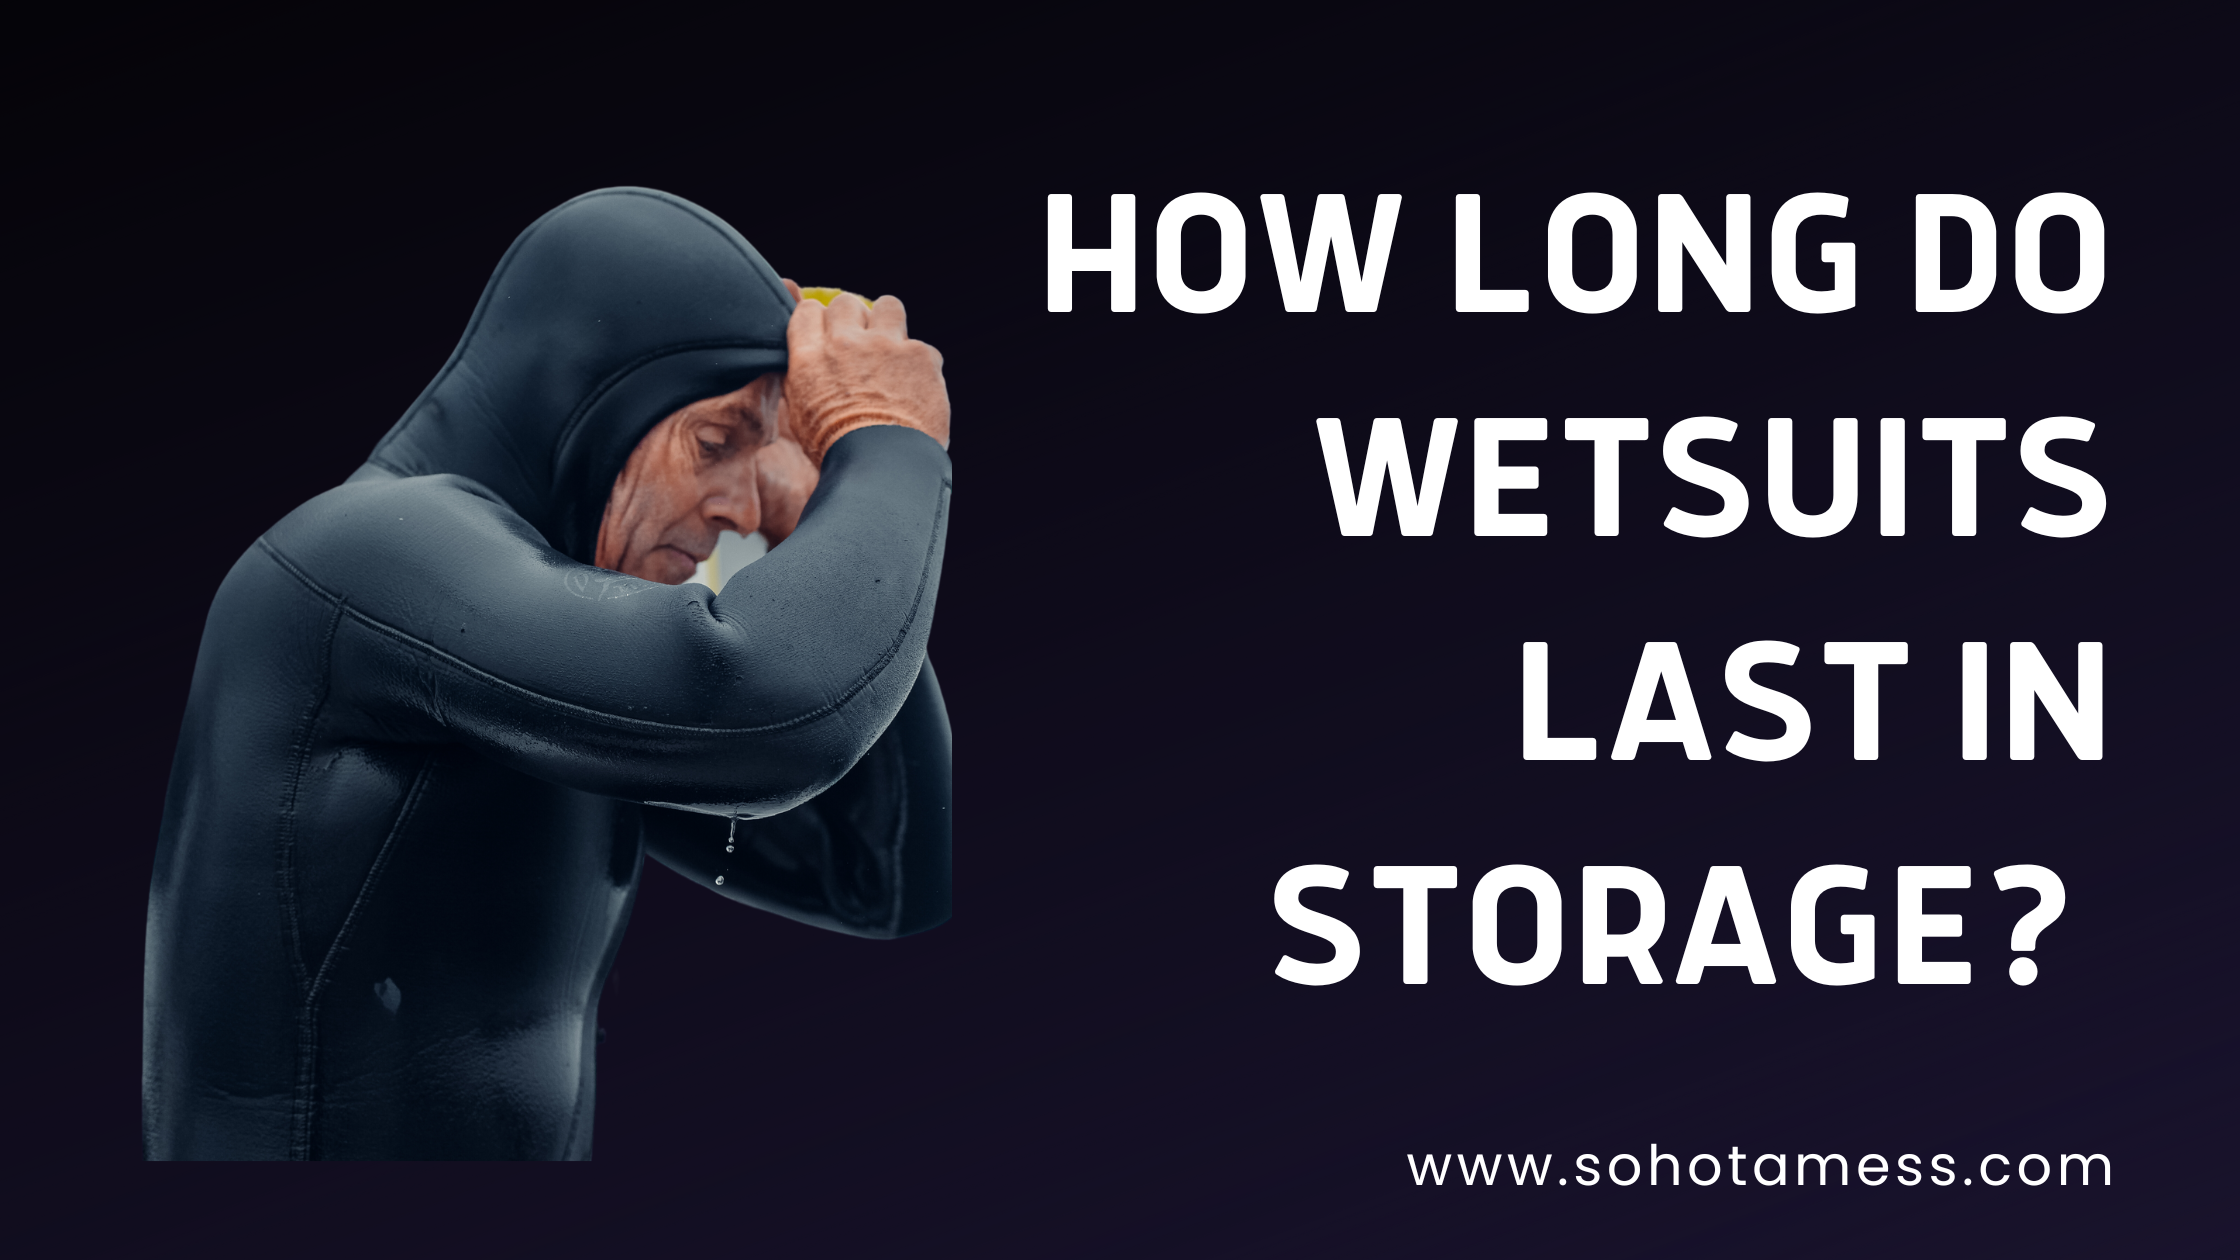 How Long Do Wetsuits Last In Storage?